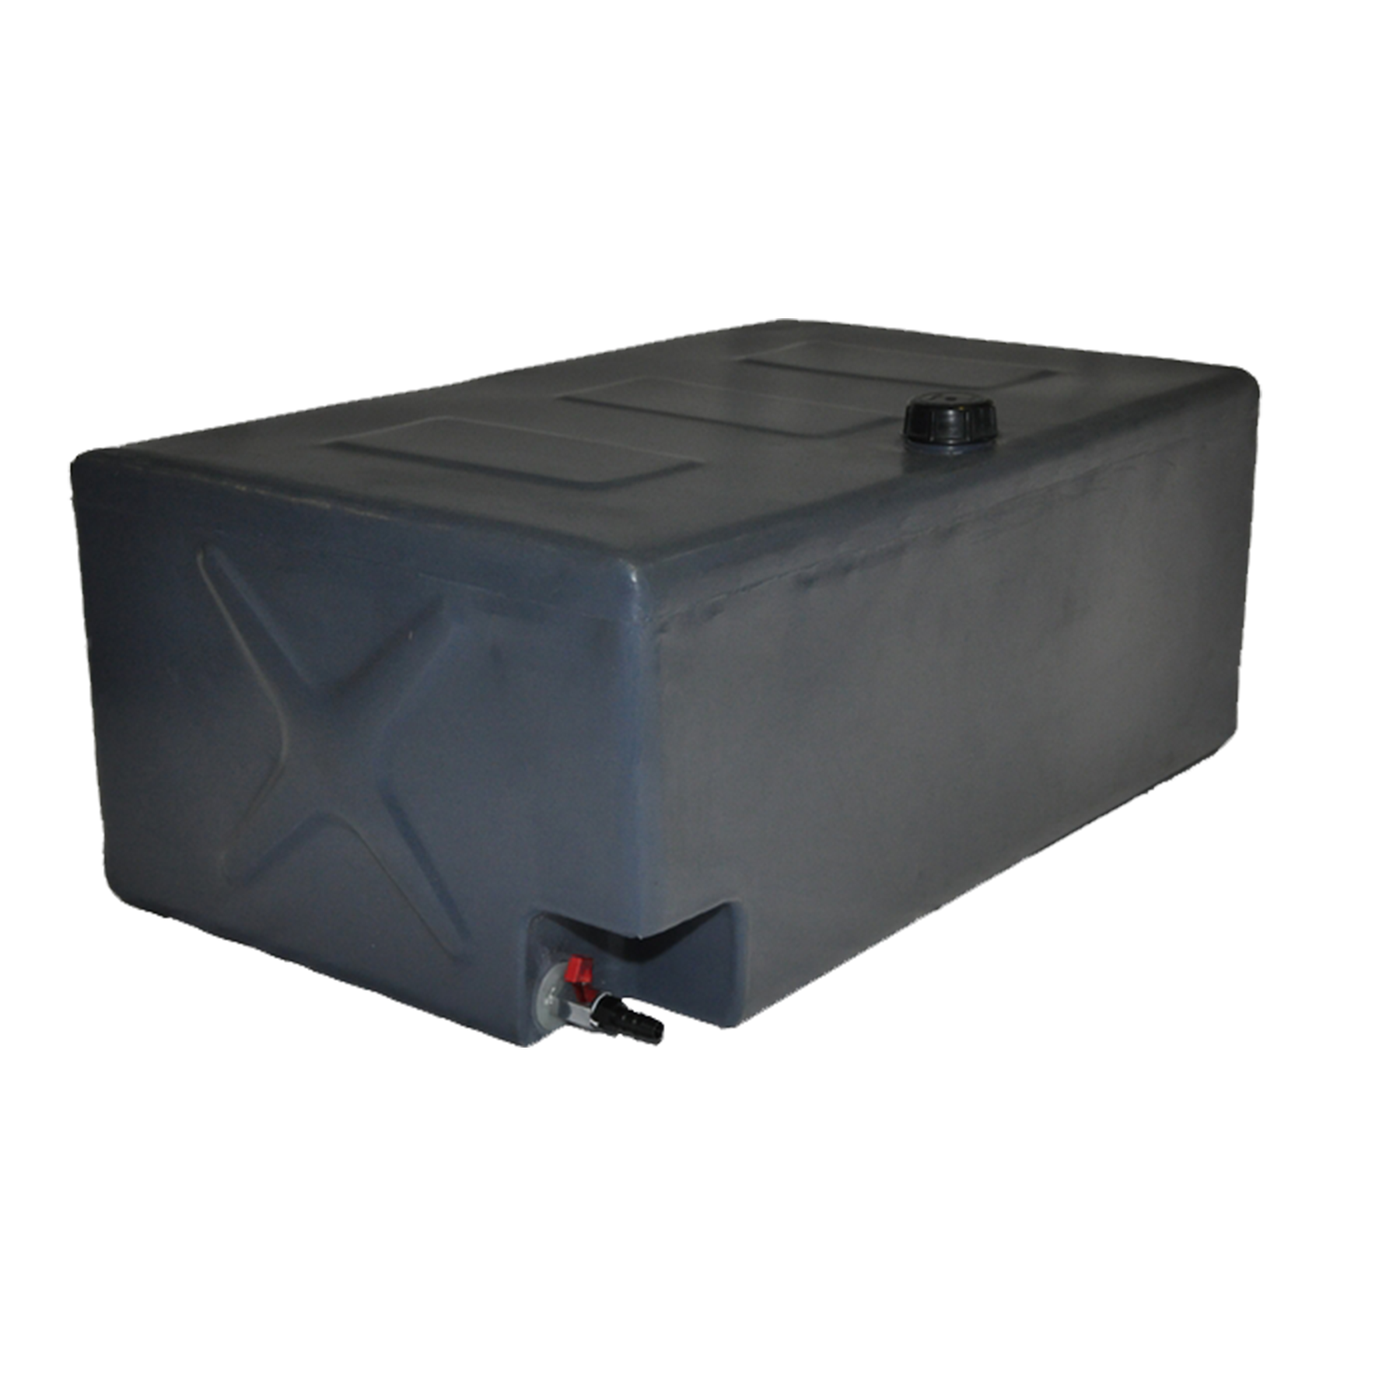 120 LITRE RECTANGLE, POLY WATER TANK